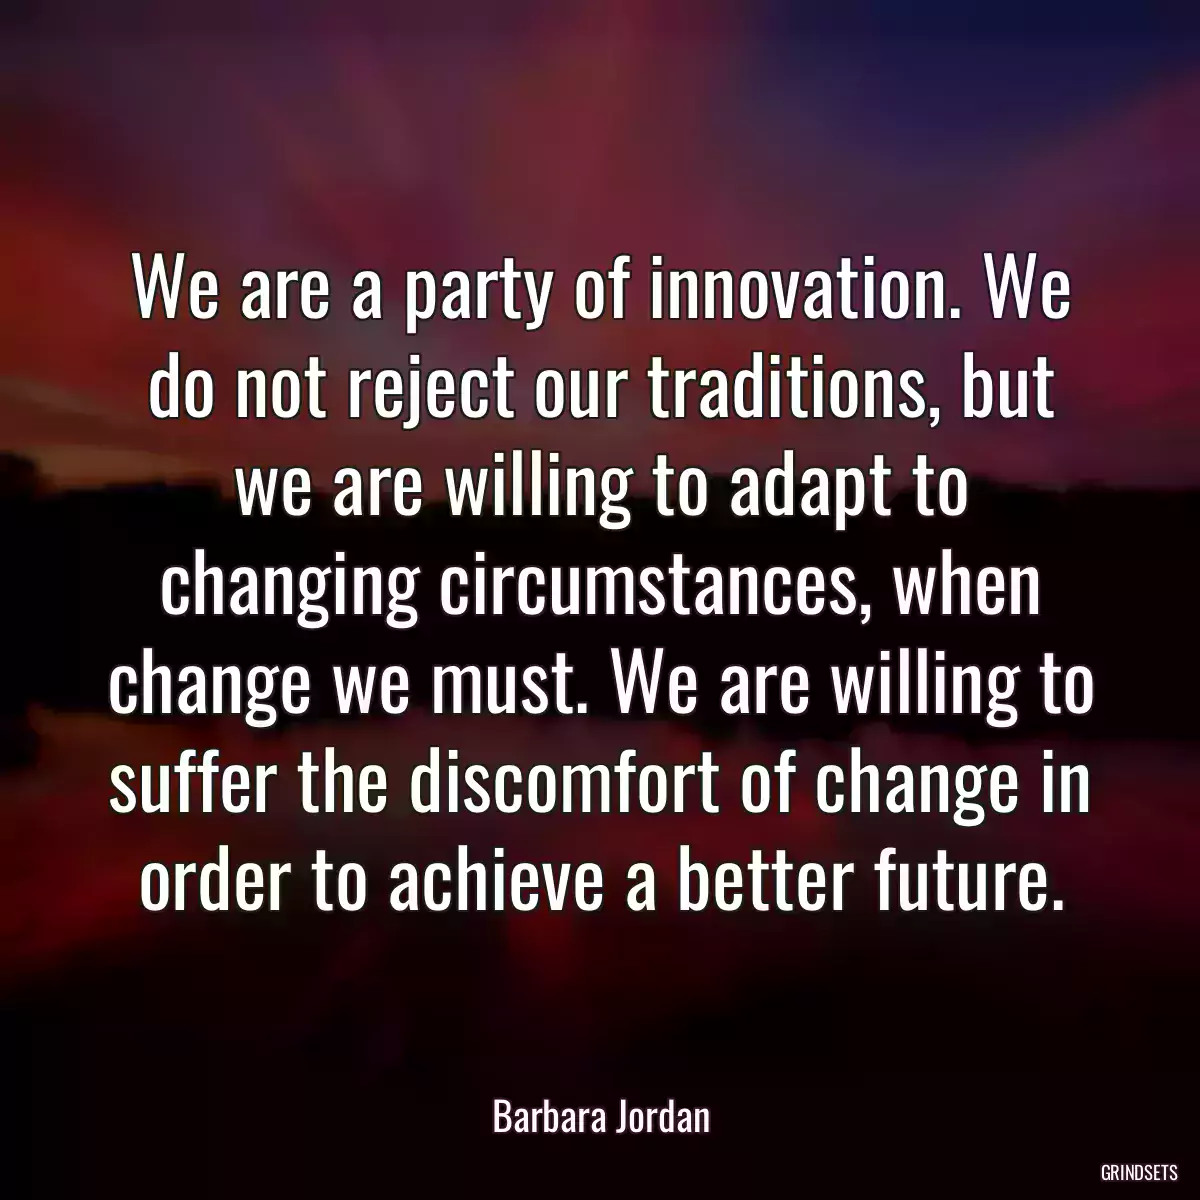 We are a party of innovation. We do not reject our traditions, but we are willing to adapt to changing circumstances, when change we must. We are willing to suffer the discomfort of change in order to achieve a better future.